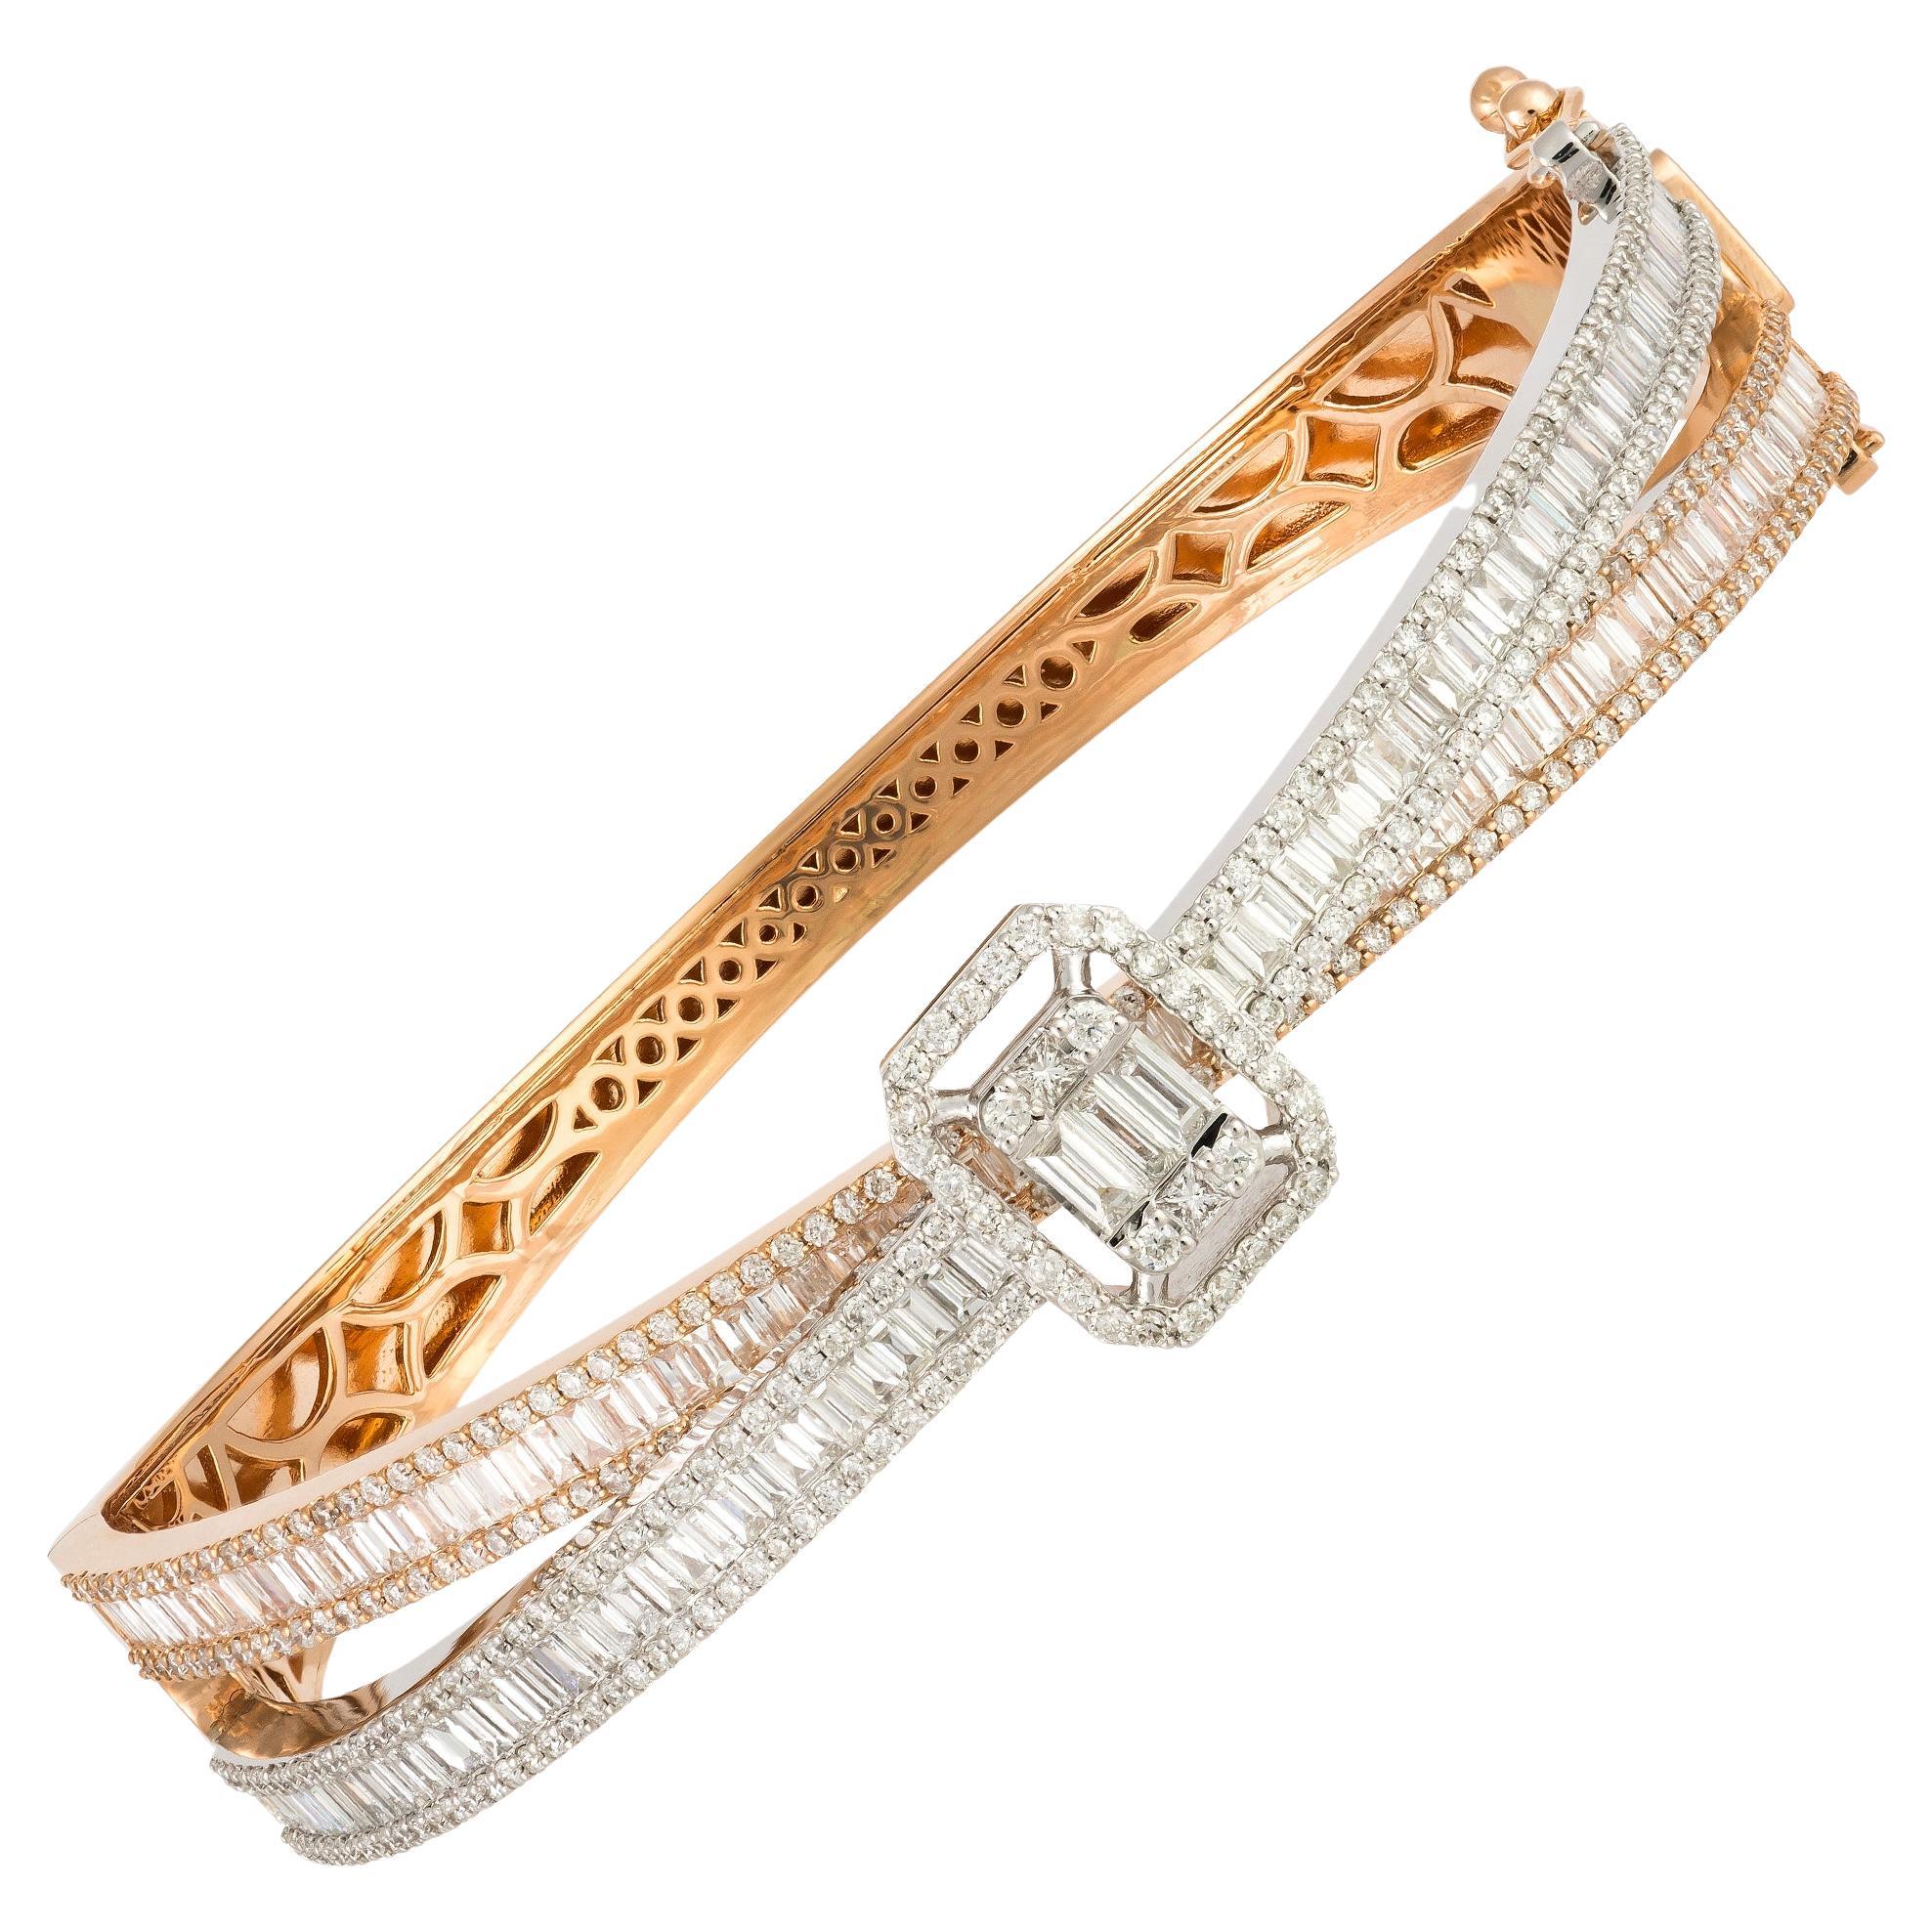 Exclusive White Pink Gold 18K Bracelet Diamond For Her